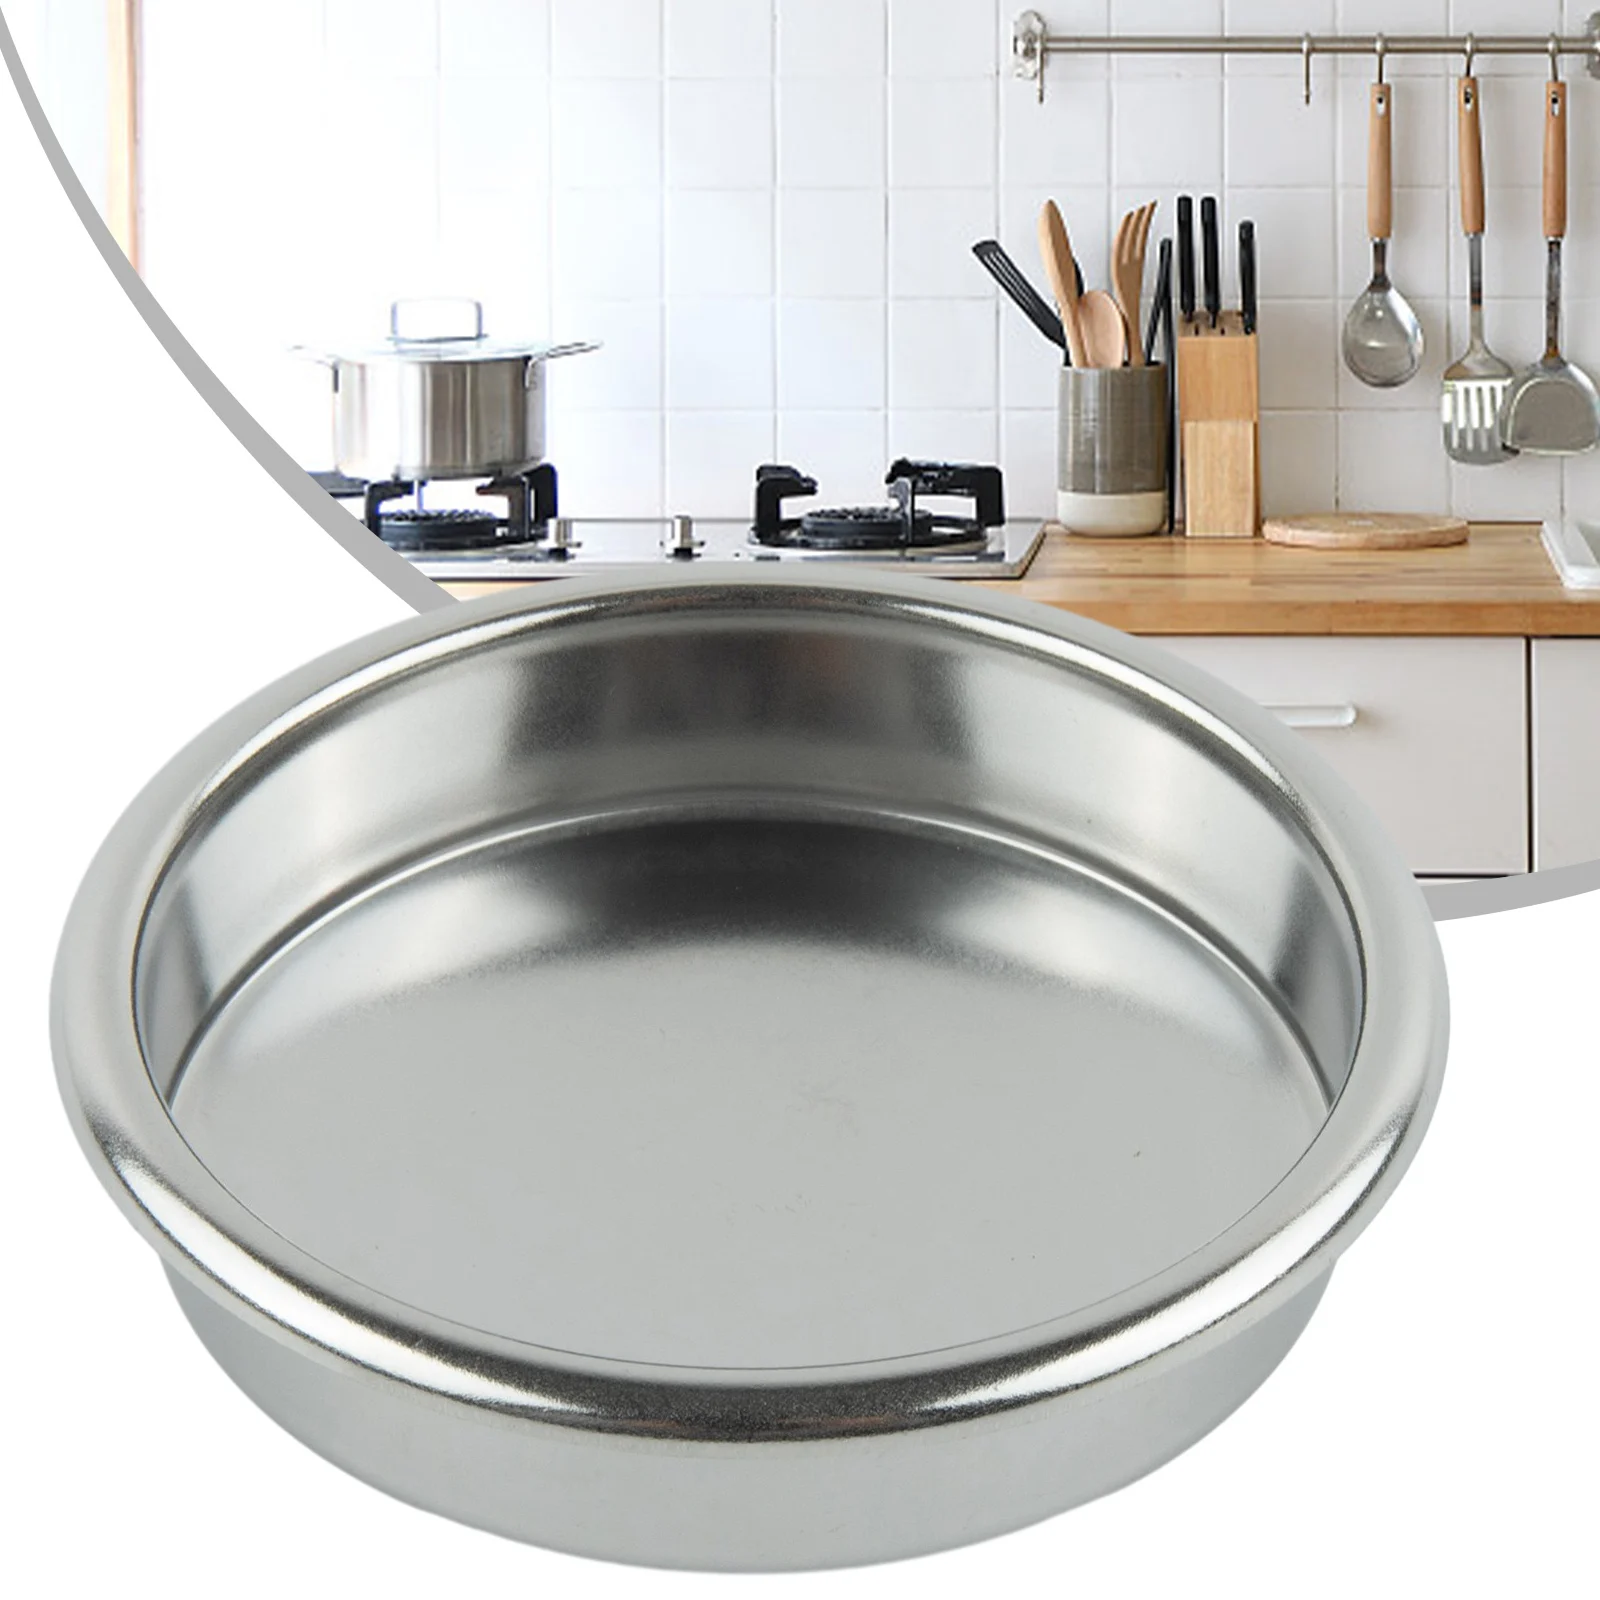 

Kitchen Tool Filter Bowl Accessories Gadgets Stainless Steel 1pc Dia 58mm Height 17mm Non-Porous Parts Durable